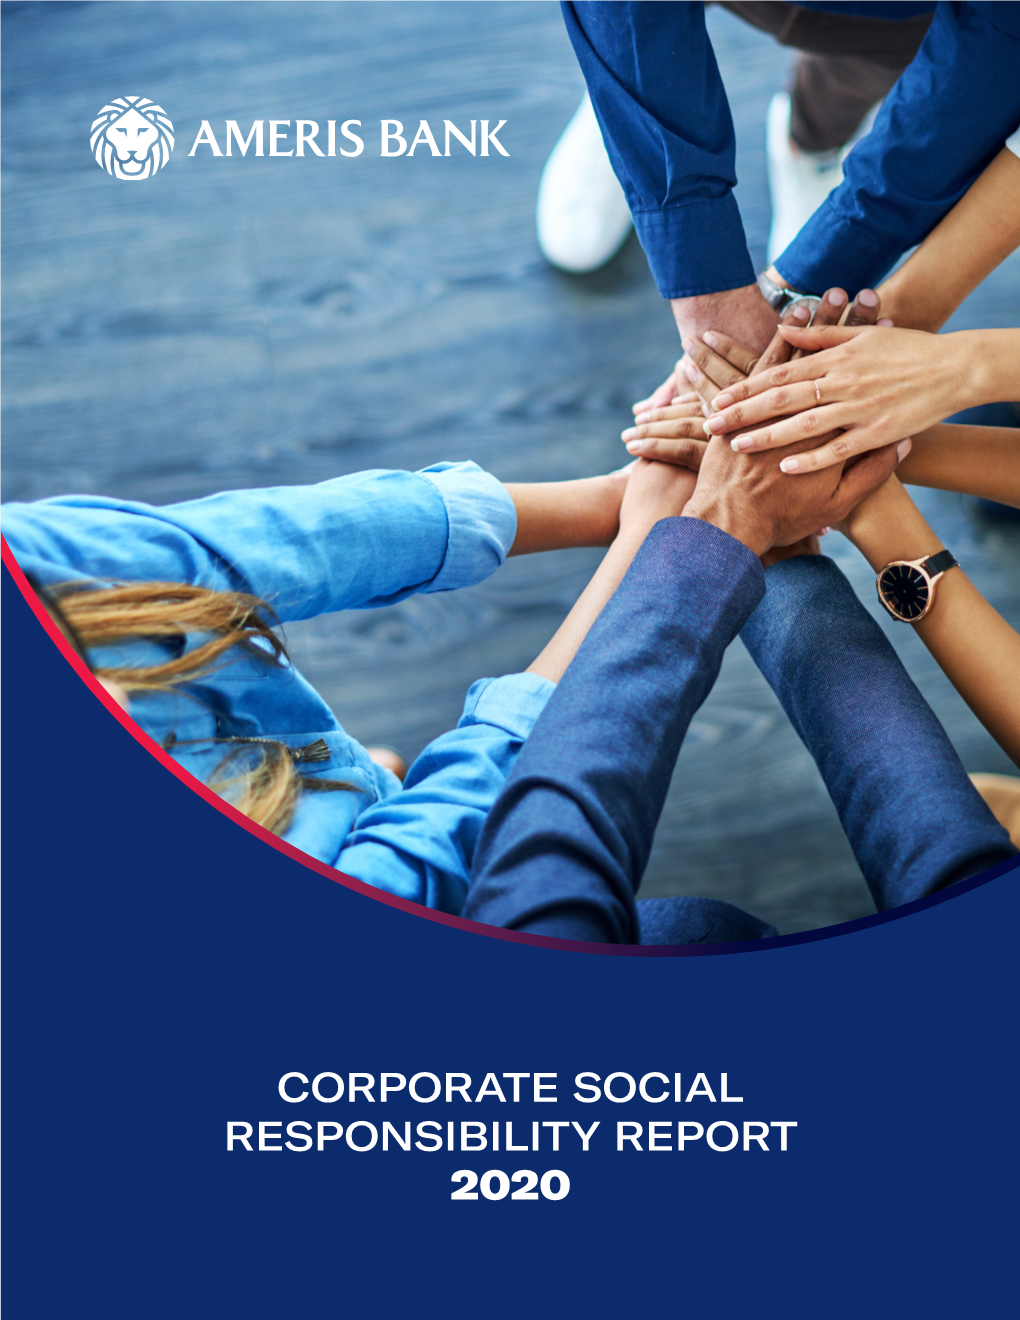 Corporate Social Responsibility Report 2020 Contents